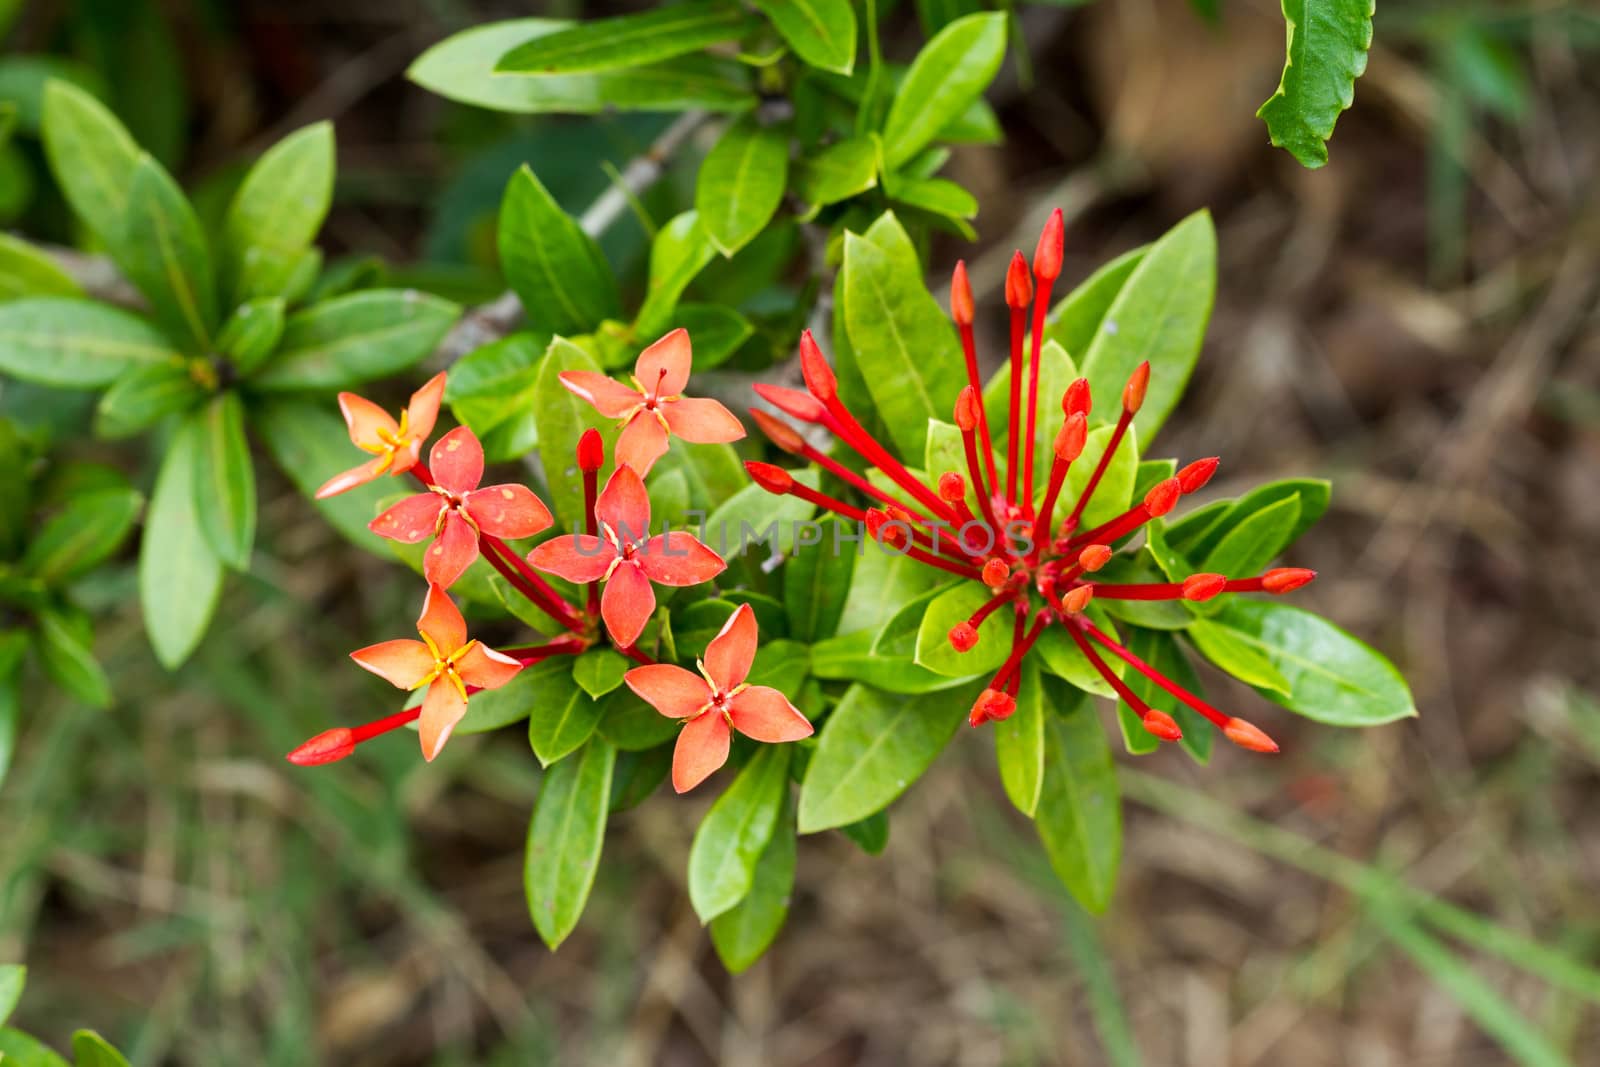 Tropical flowers Red Ixora coccinea (or Jungle Geranium, Flame of the Woods, and Jungle Flame) Blur background